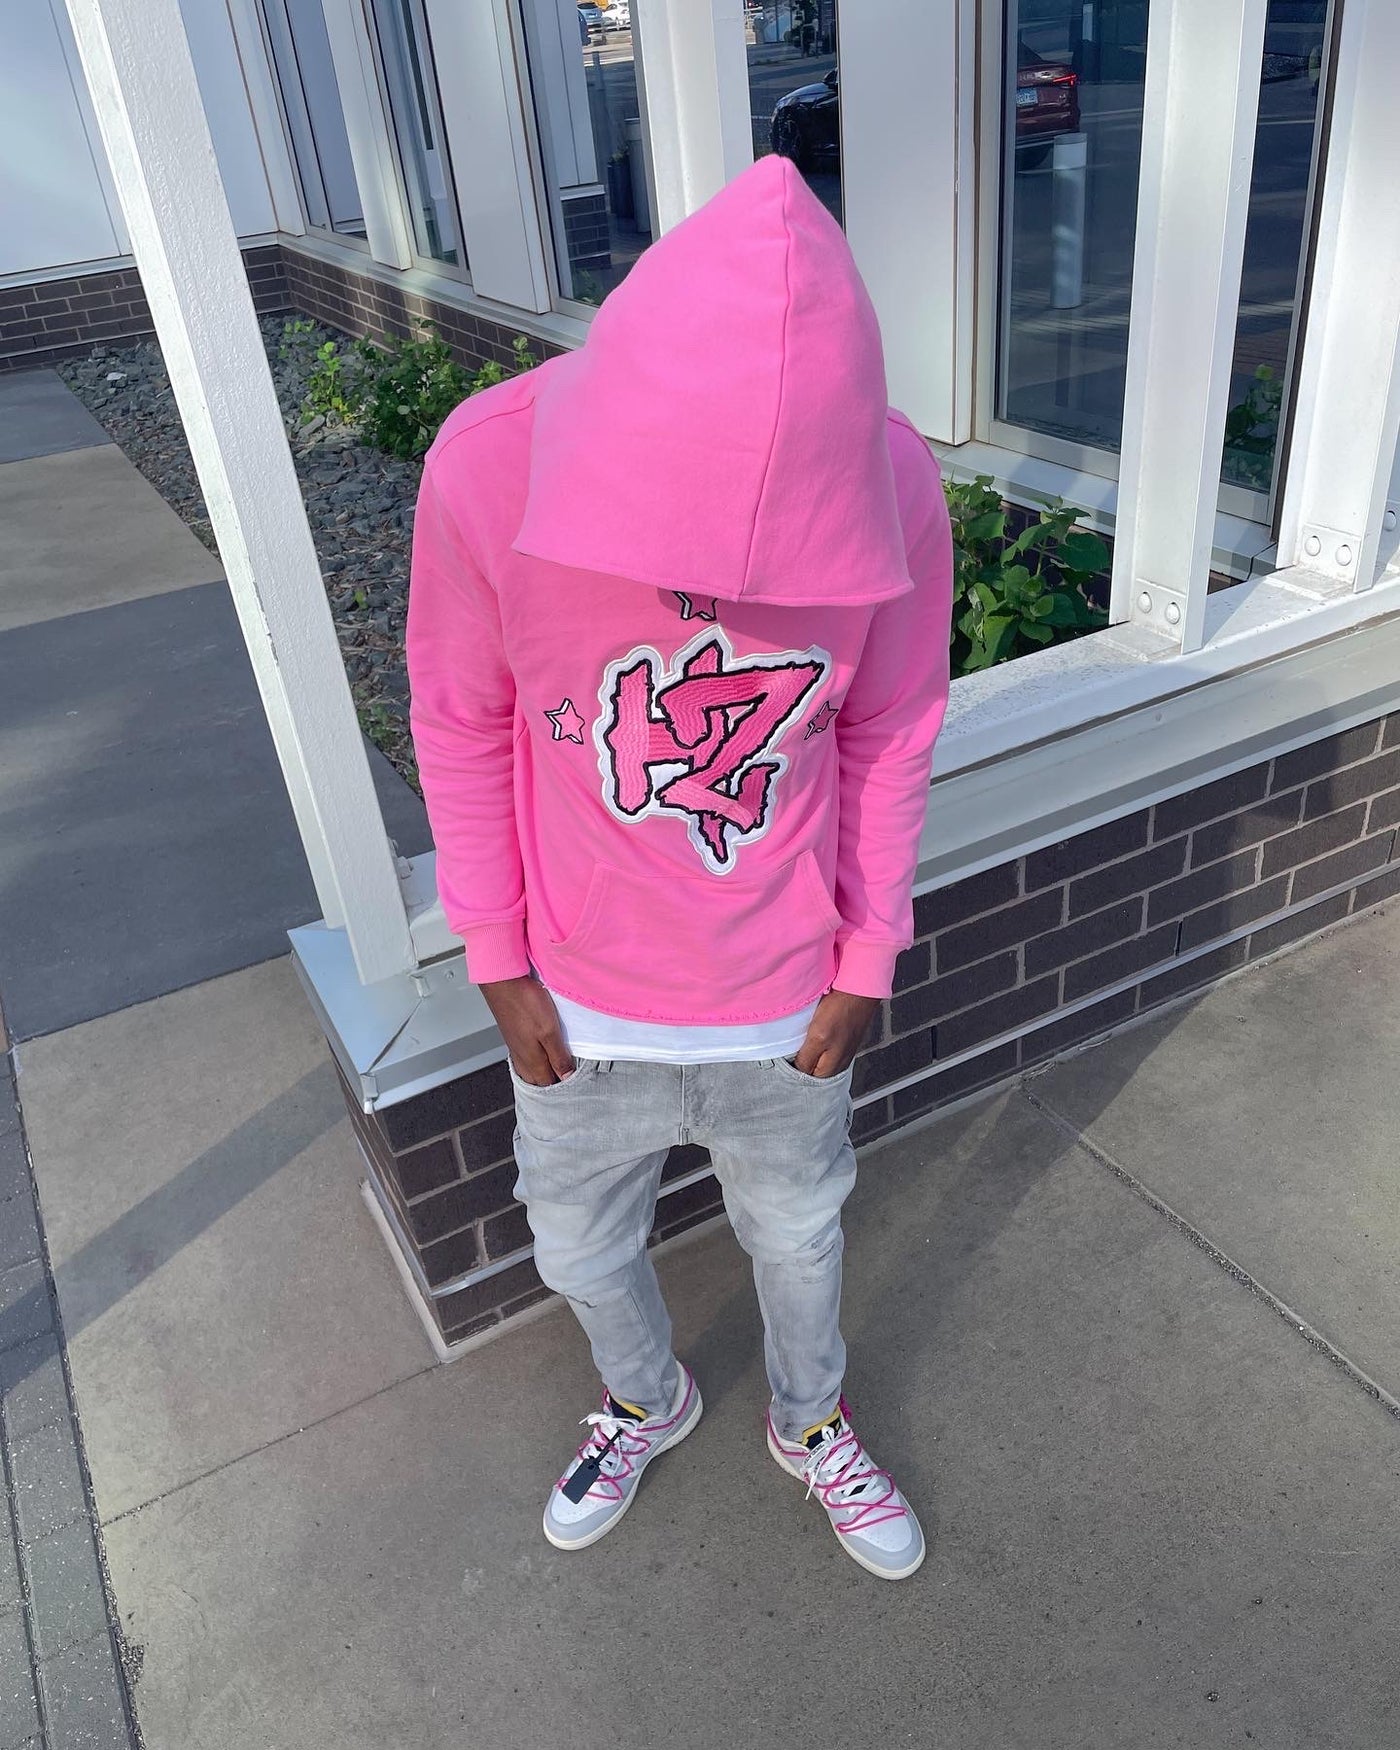 HZ Pink Cropped Pullover